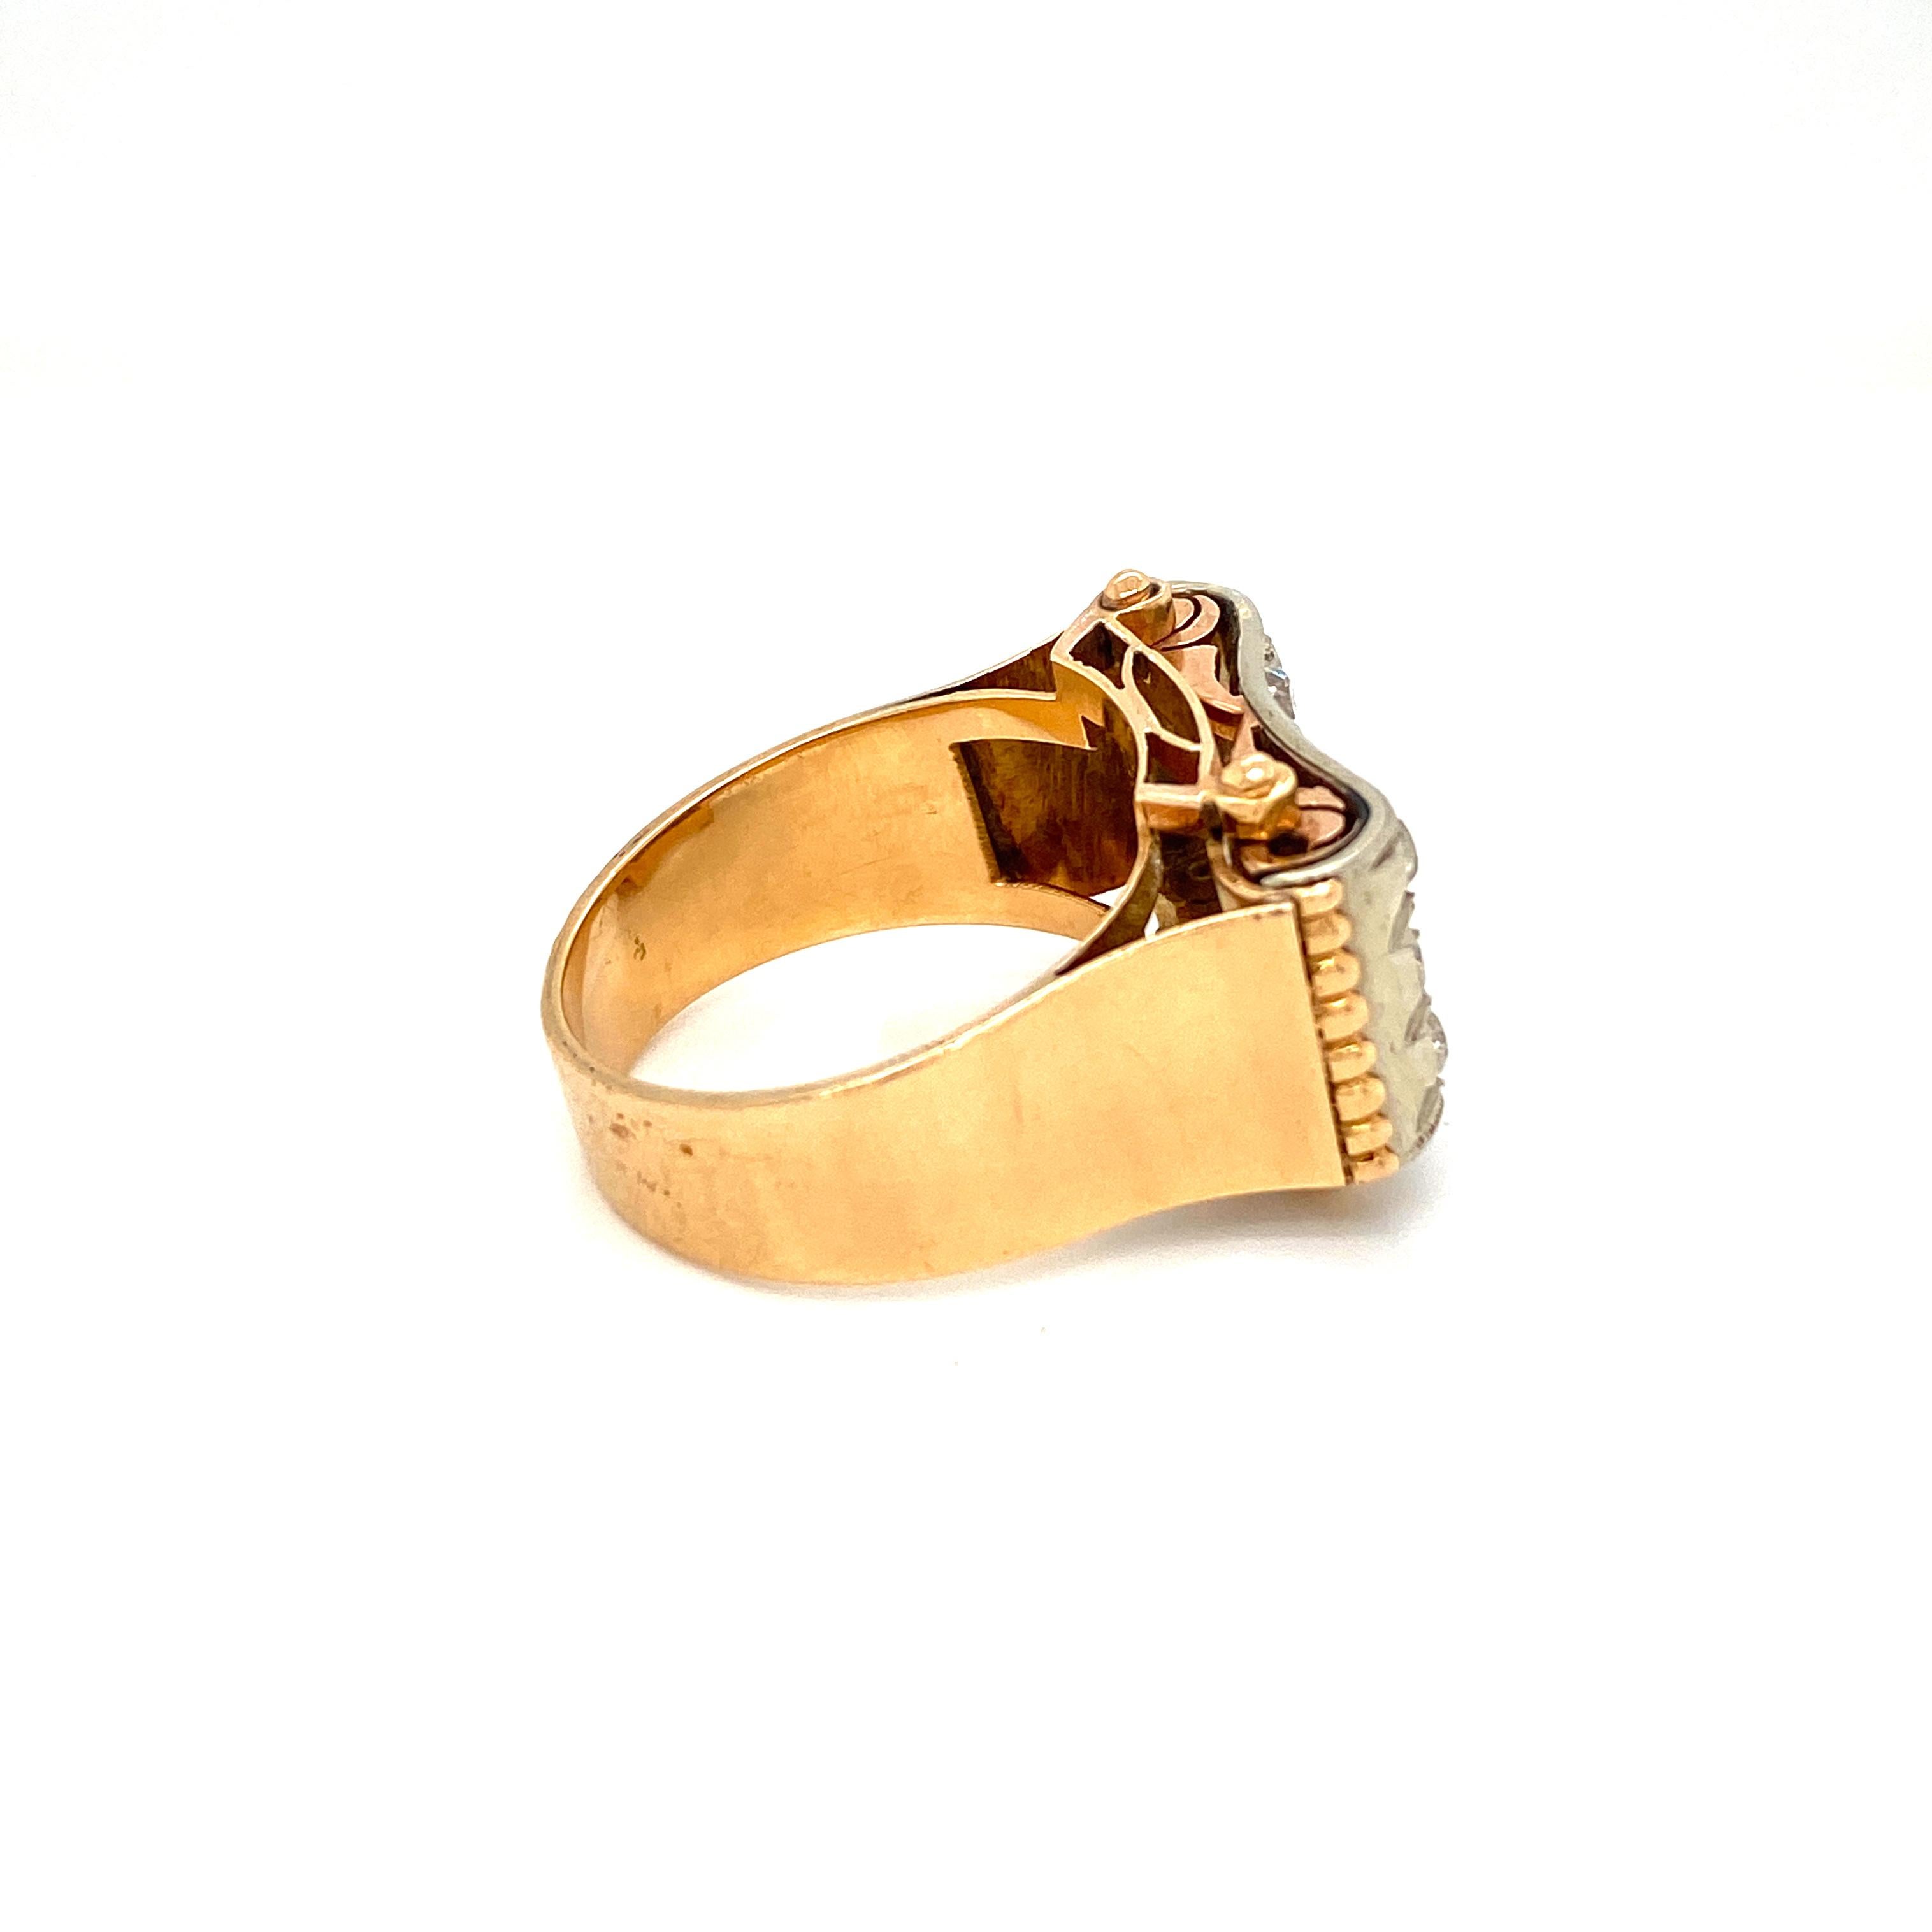 Retro 3.30 Carat Diamond Gold Cocktail Ring In Excellent Condition For Sale In Napoli, Italy